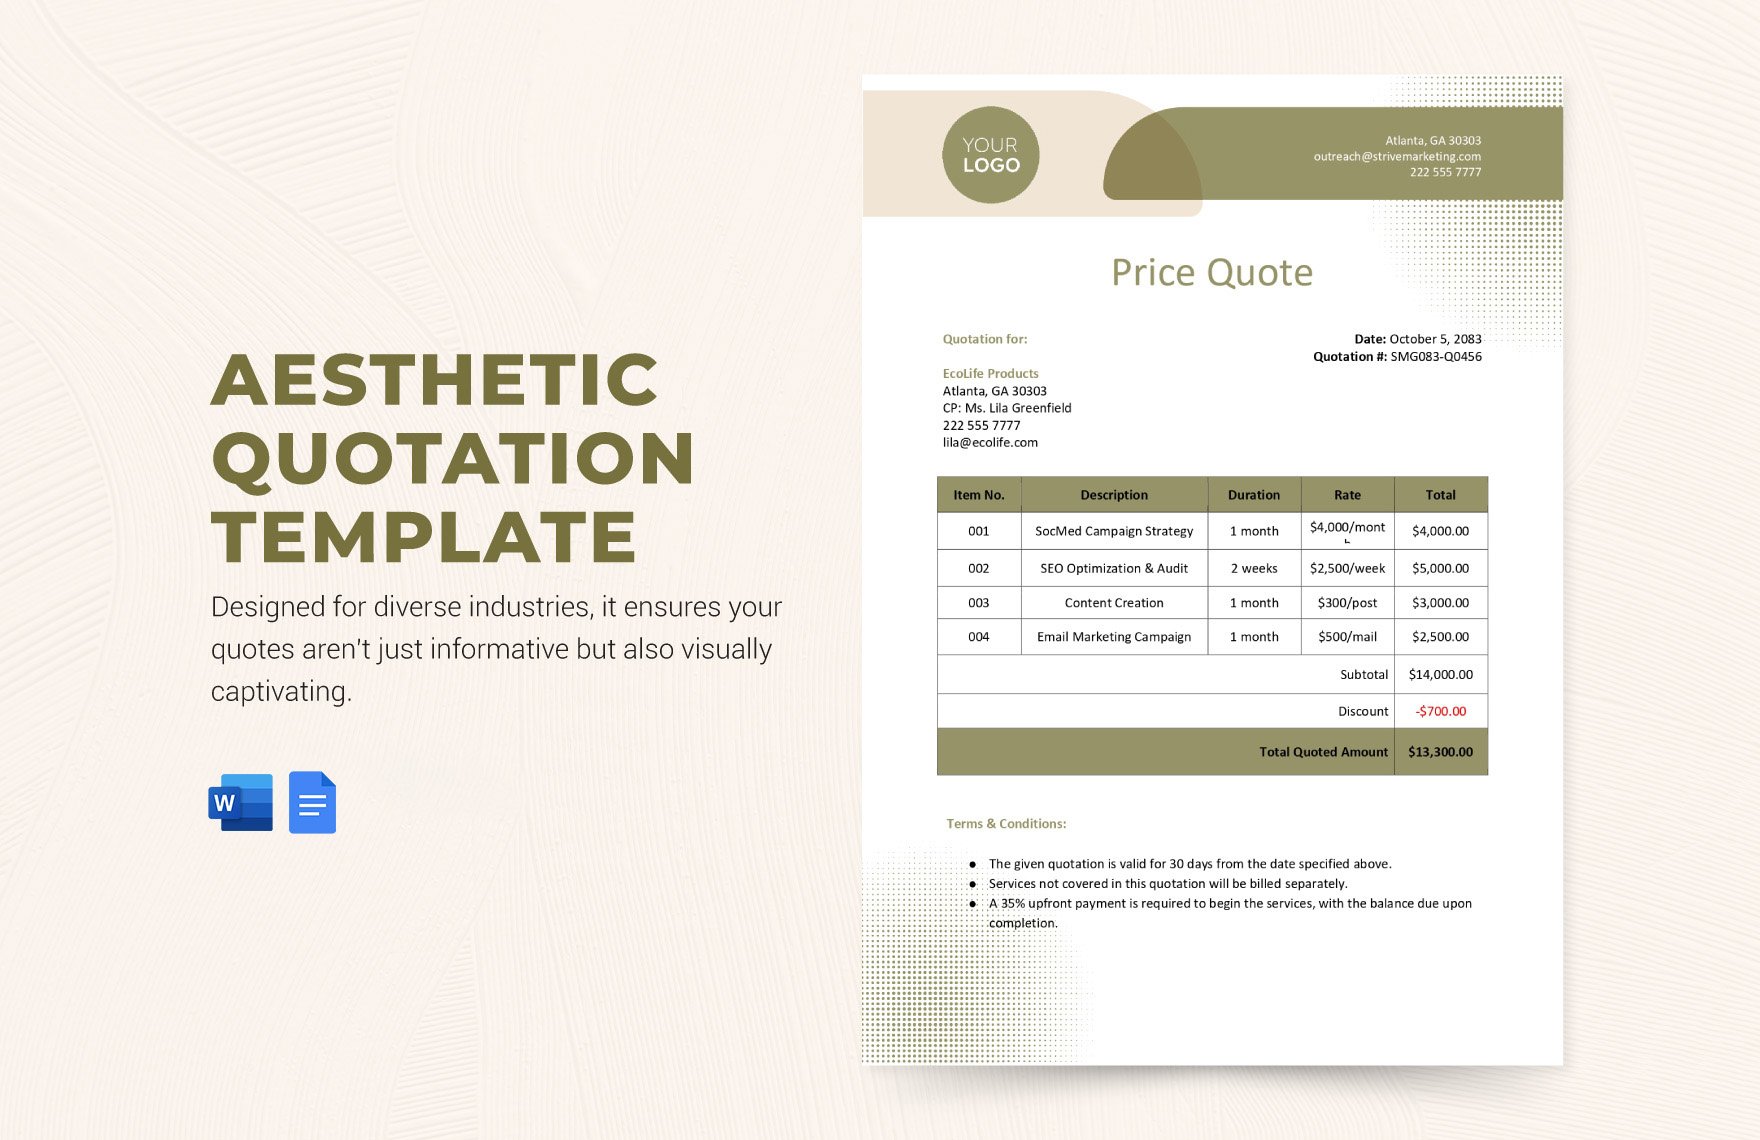 Aesthetic Quotation Design Template in Word, Google Docs